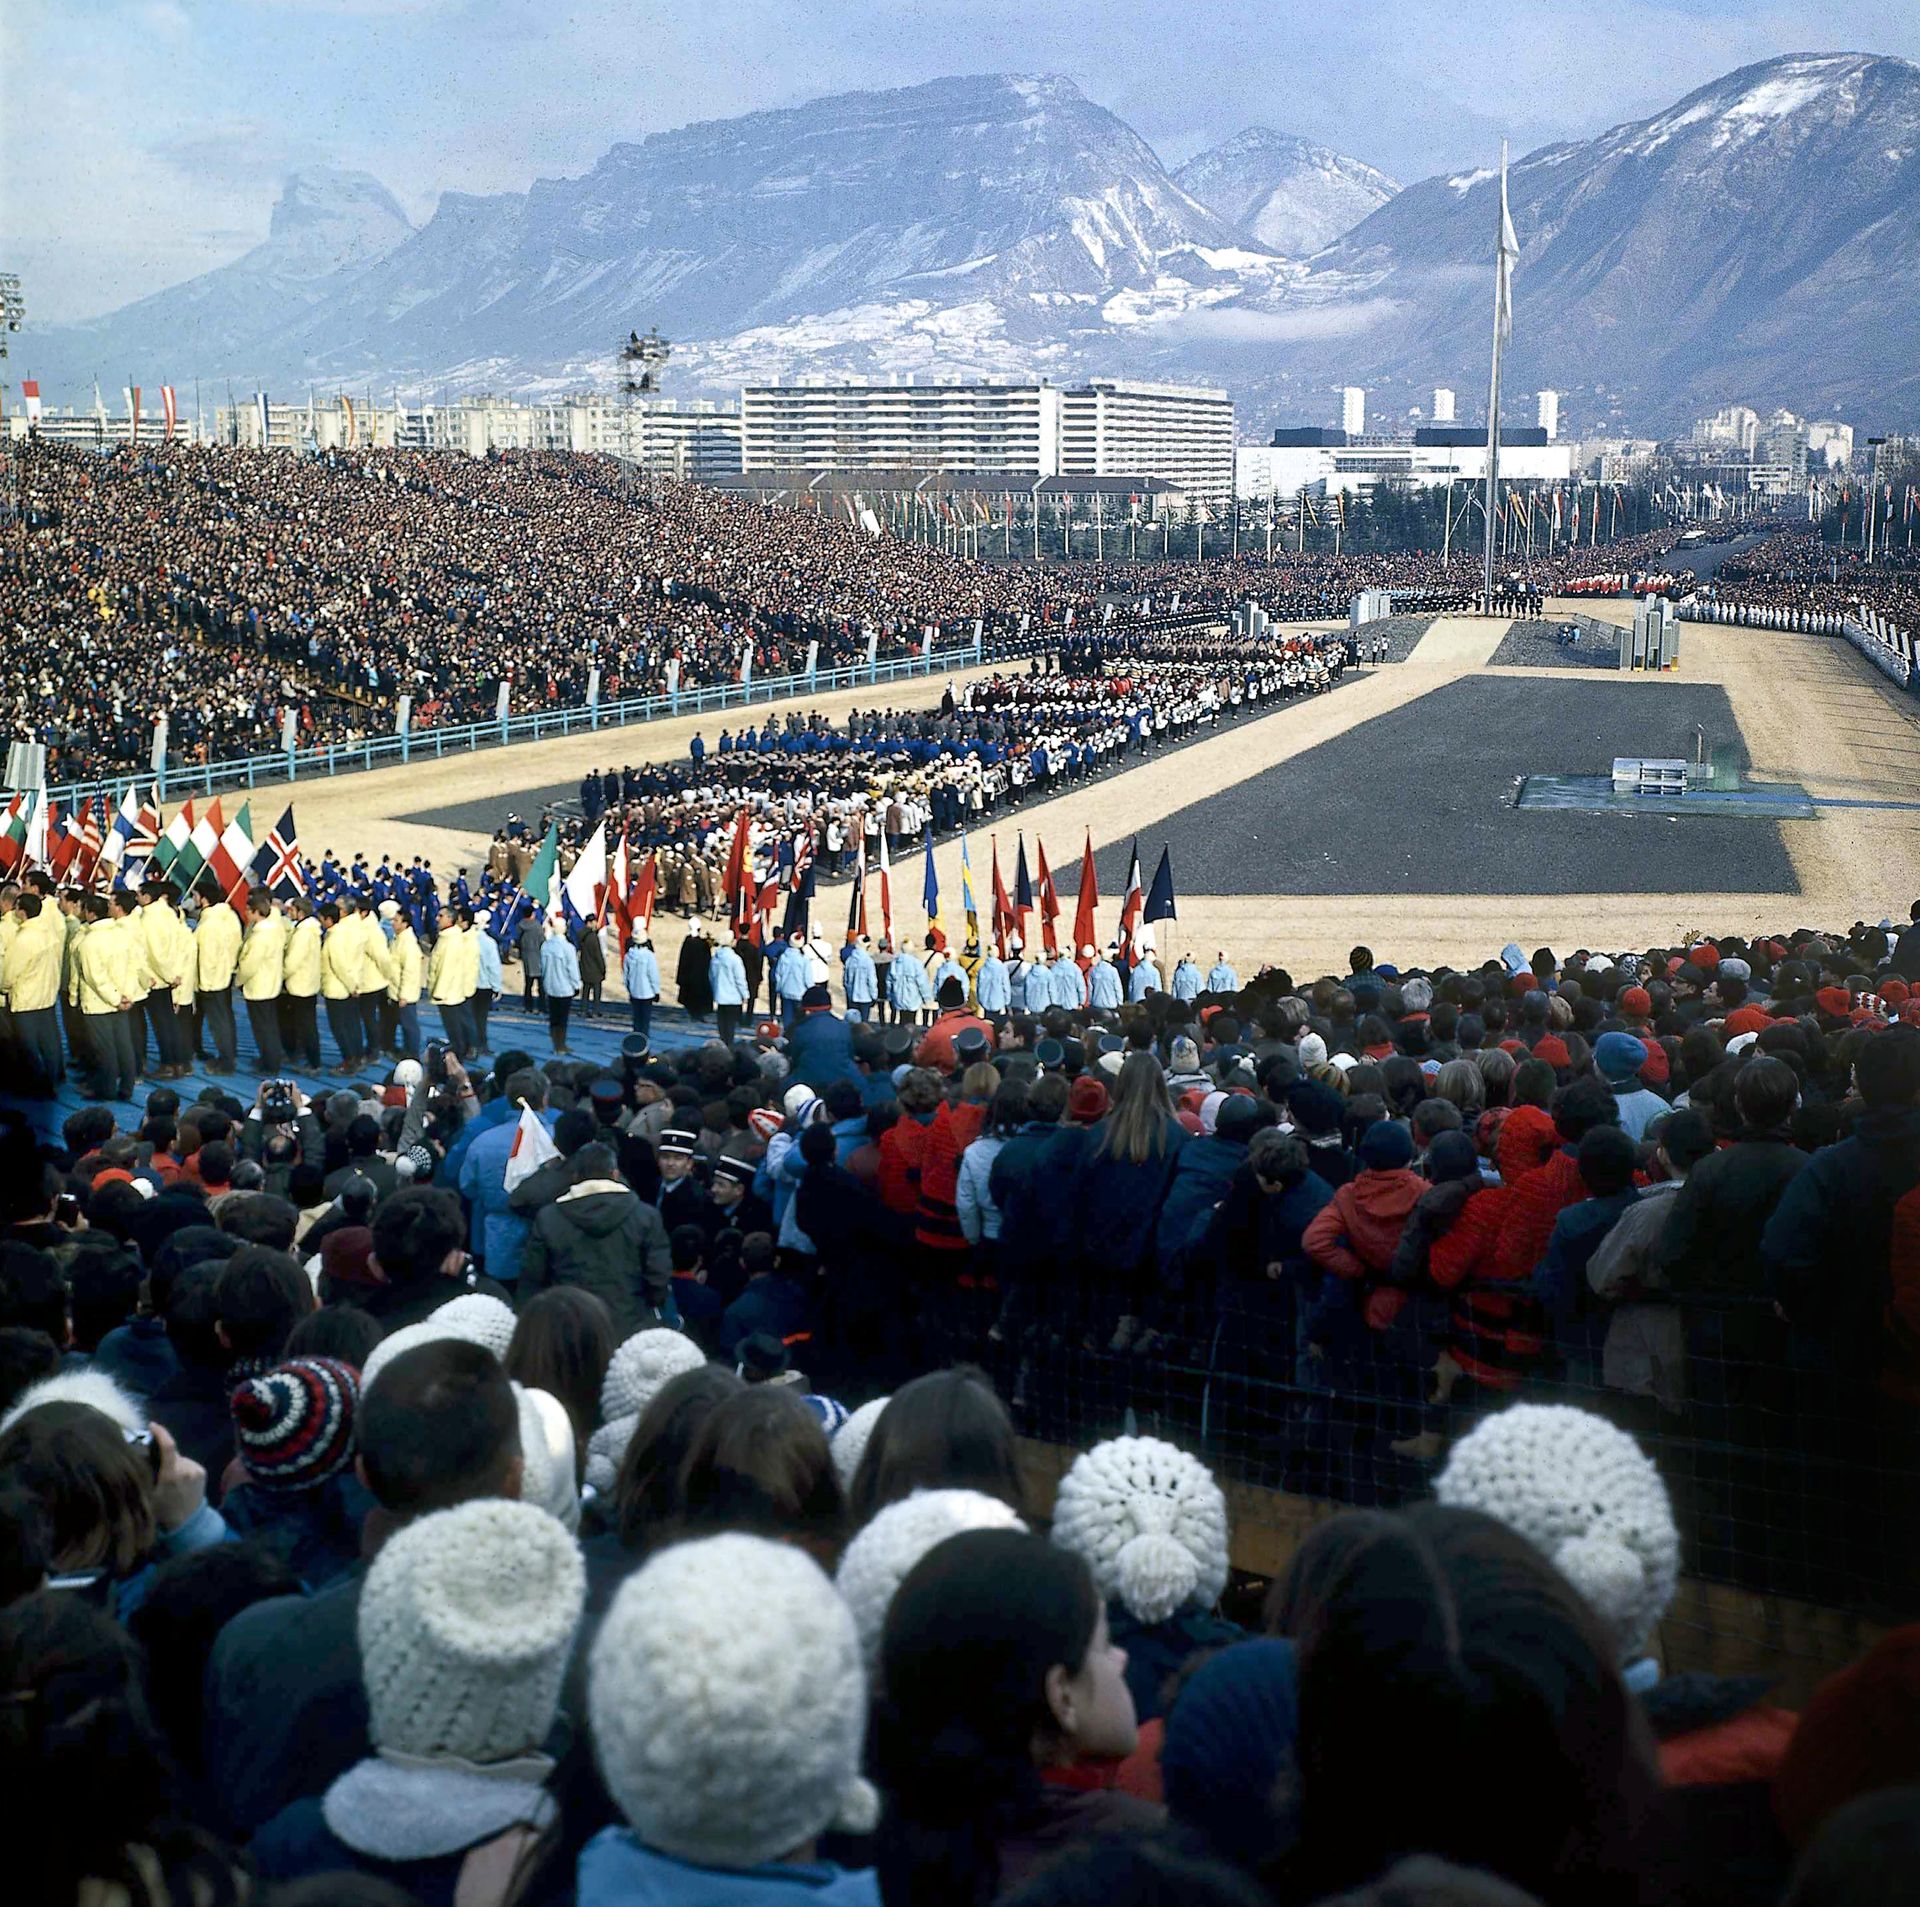 Null Grenoble 1968. Opening ceremony © L'Équipe 6 February 1968.
"The first grea&hellip;